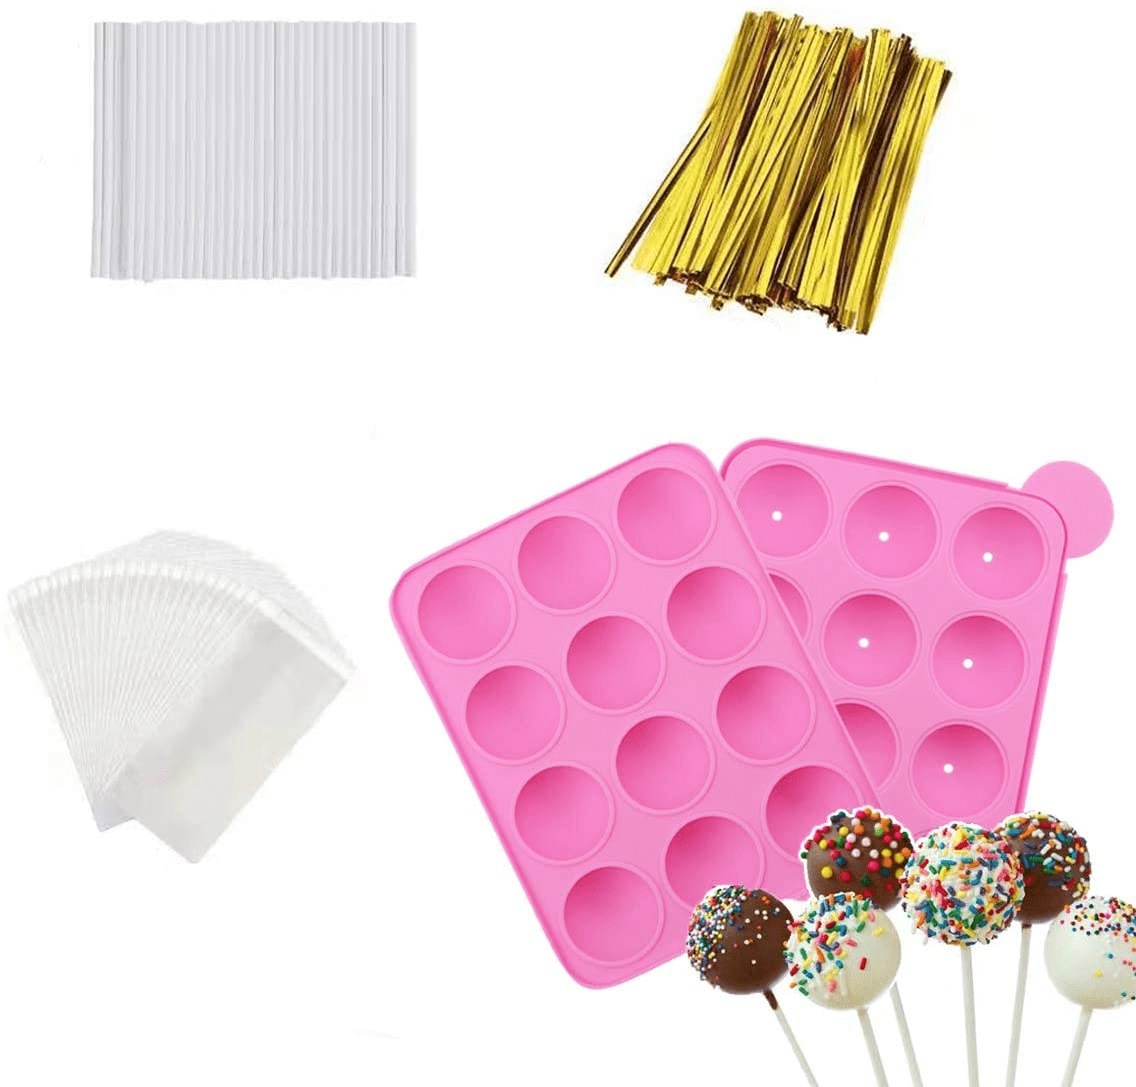 Hycsc 12 Capacity Silicone Lollipop Molds,Chocolate Hard Candy Mold with 50pcs 4 inch Lollypop Sucker Sticks,Candy Treat Bags,Gold Ties. (Round), Size